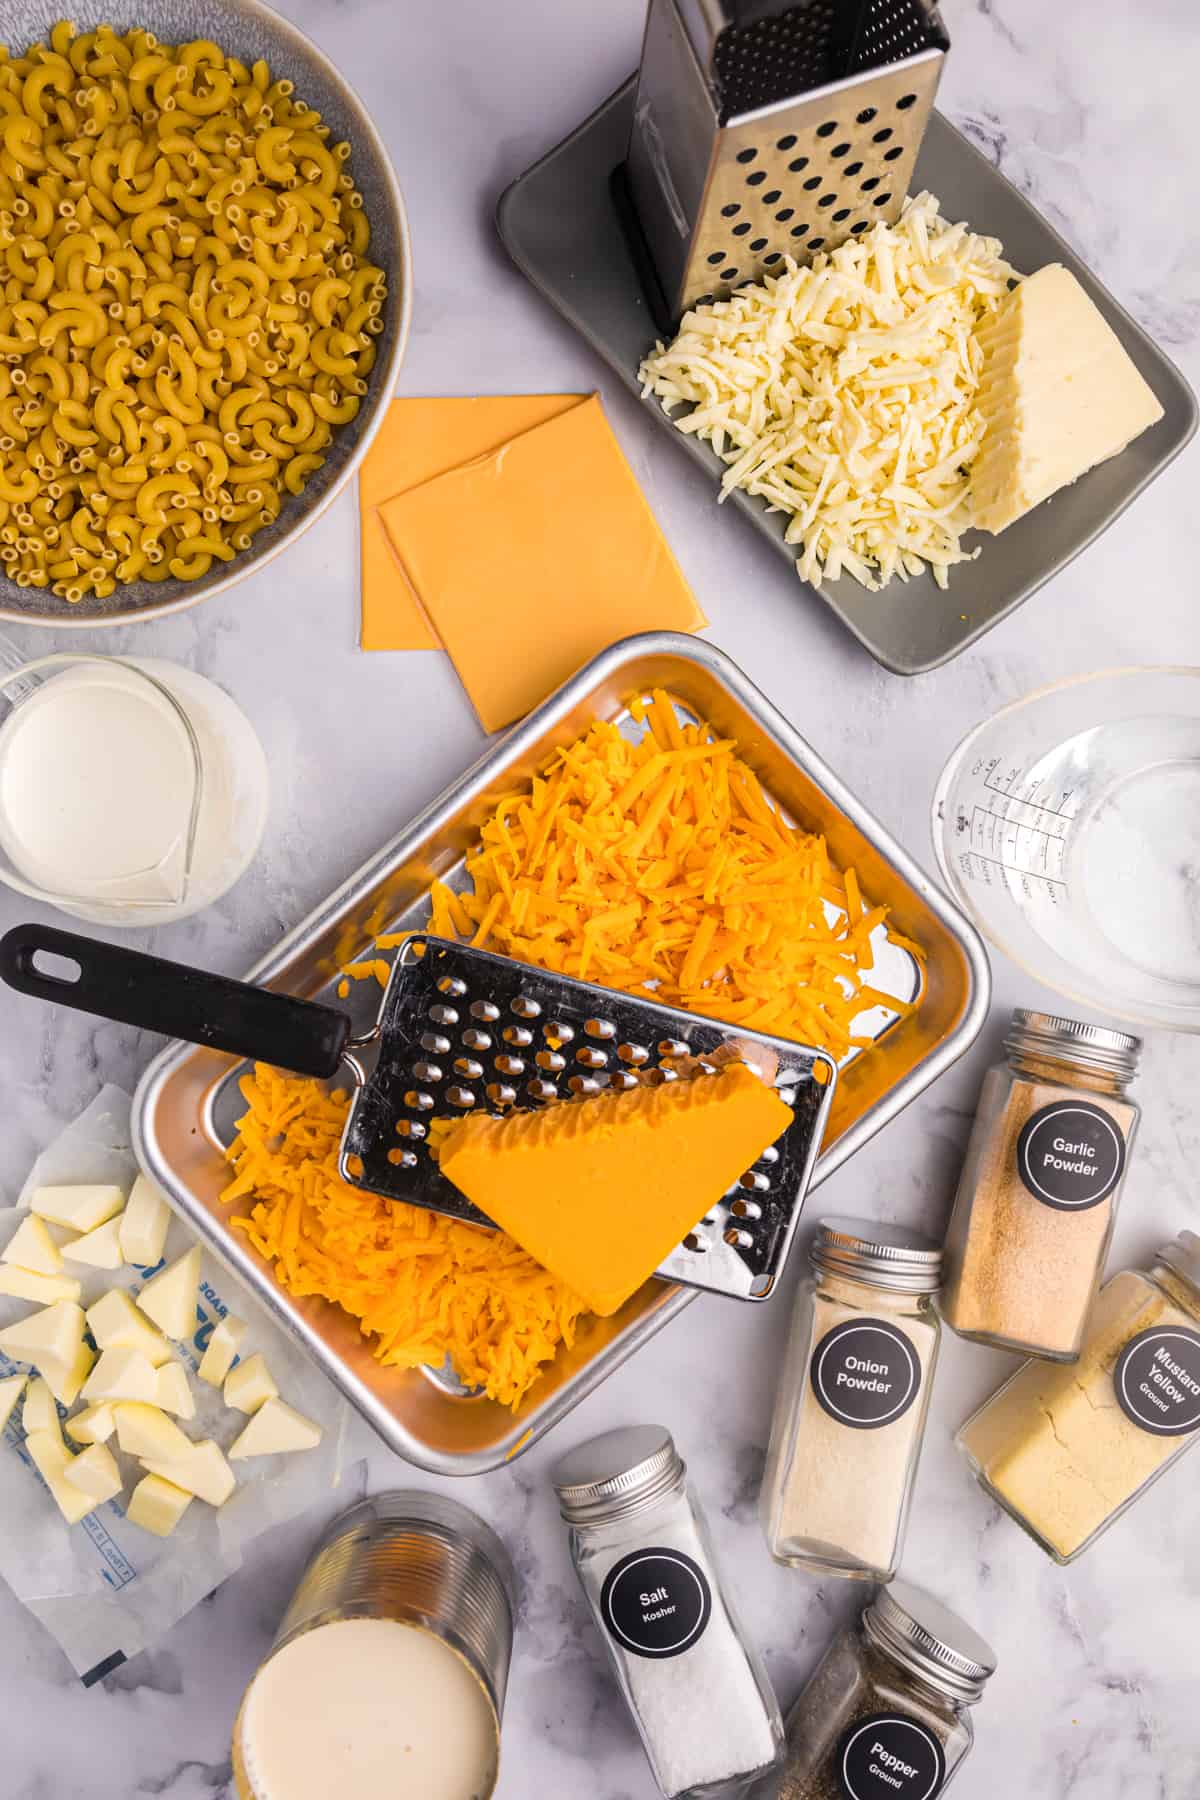 The ingredients for Crockpot mac and cheese are presented on a surface. 